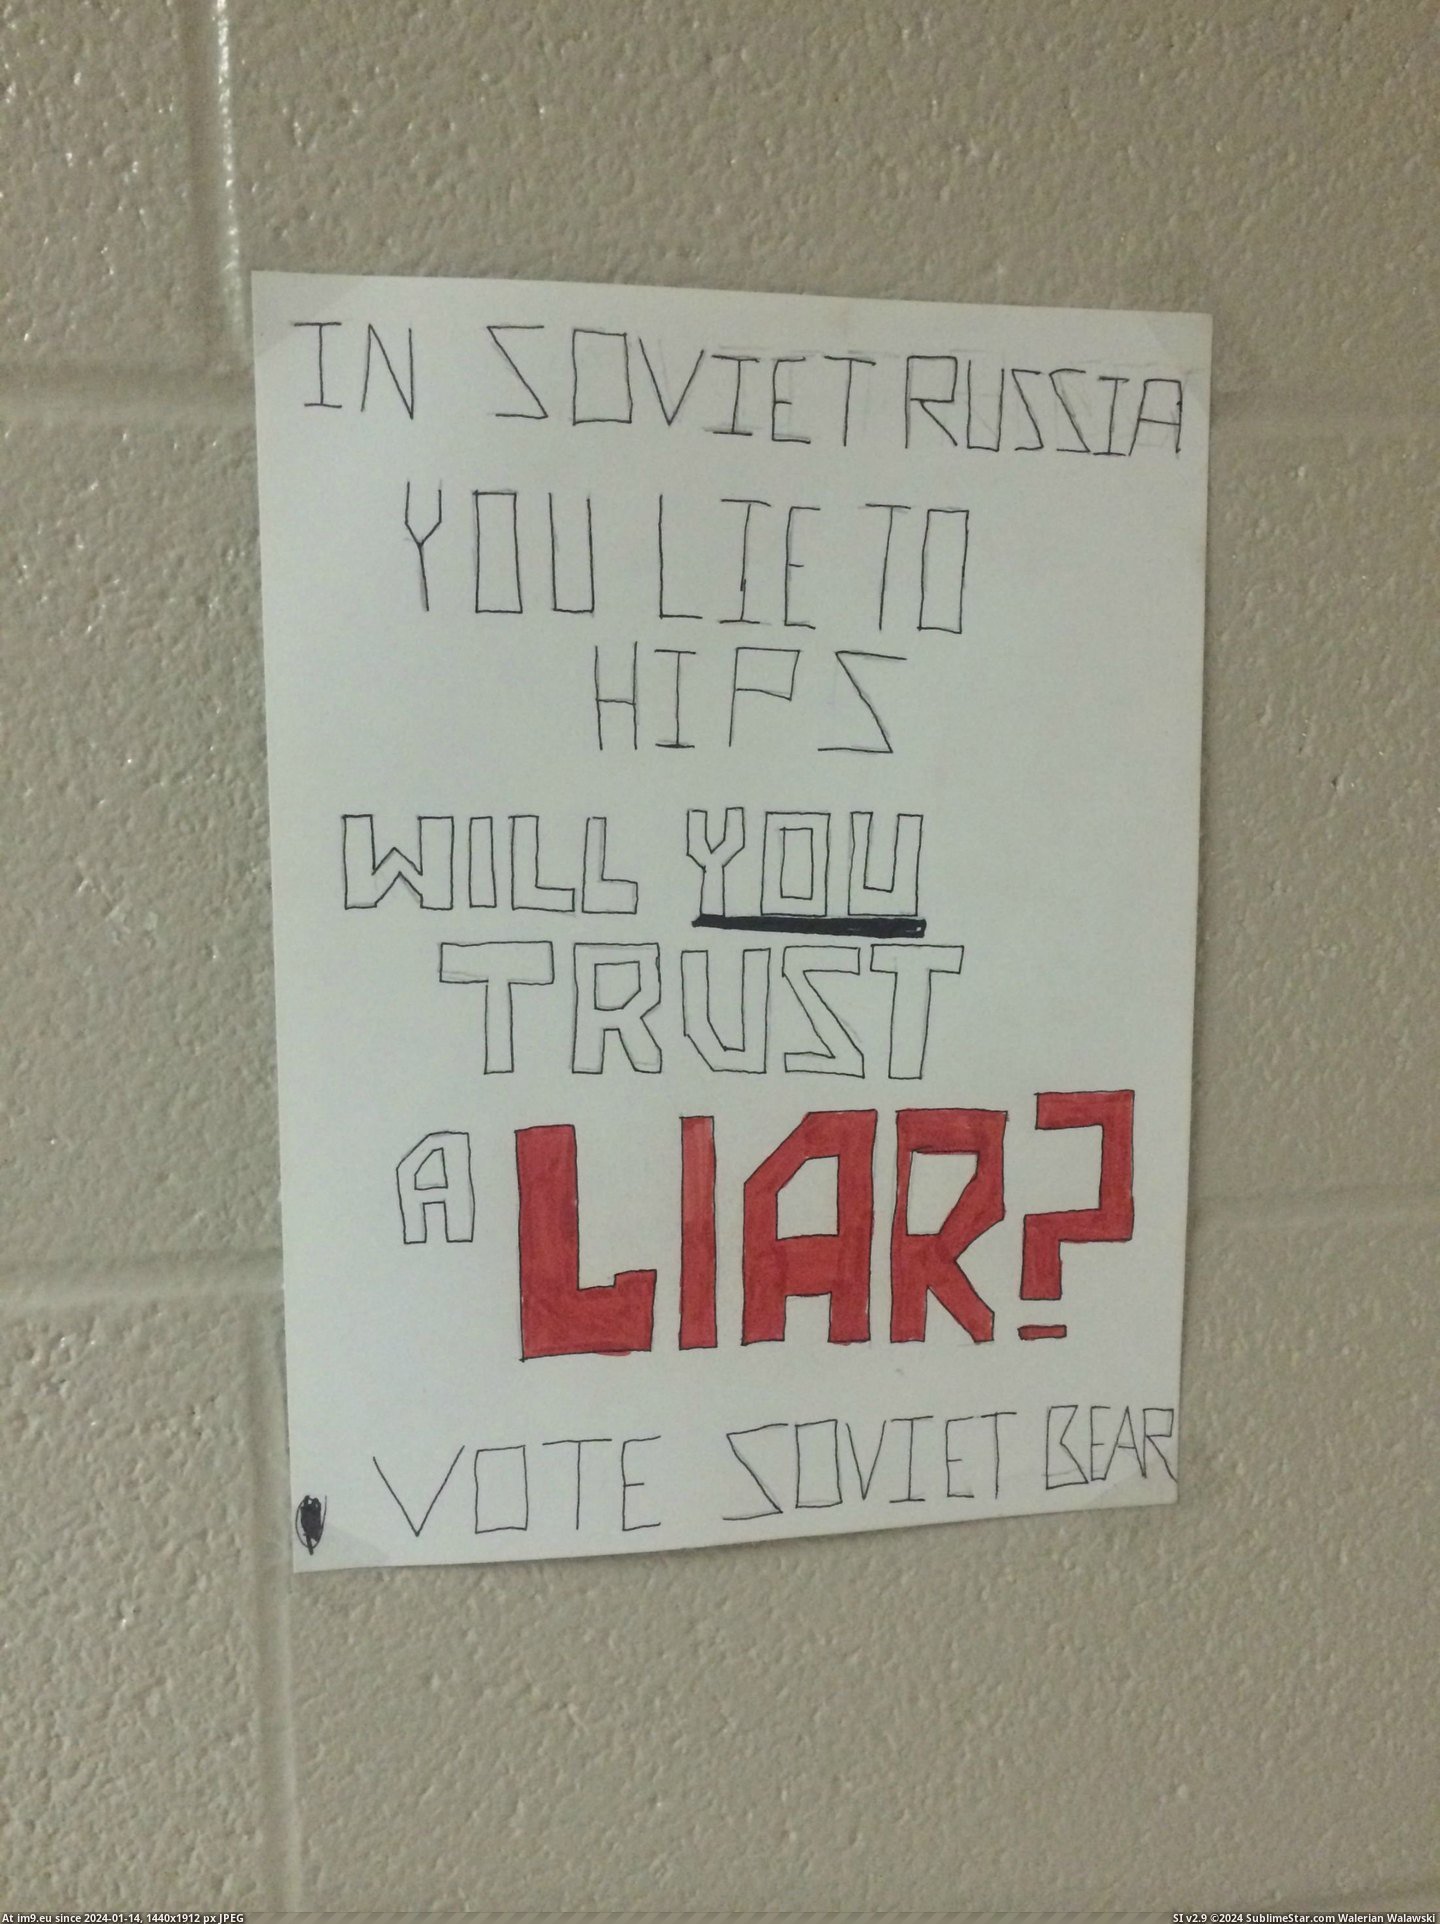 #Funny #School #Decided #Holding #Soviet #Council #Elections #Bear #Student #Run [Funny] So my school is holding elections for student council... and someone has decided to run as Soviet Bear 9 Pic. (Изображение из альбом My r/FUNNY favs))